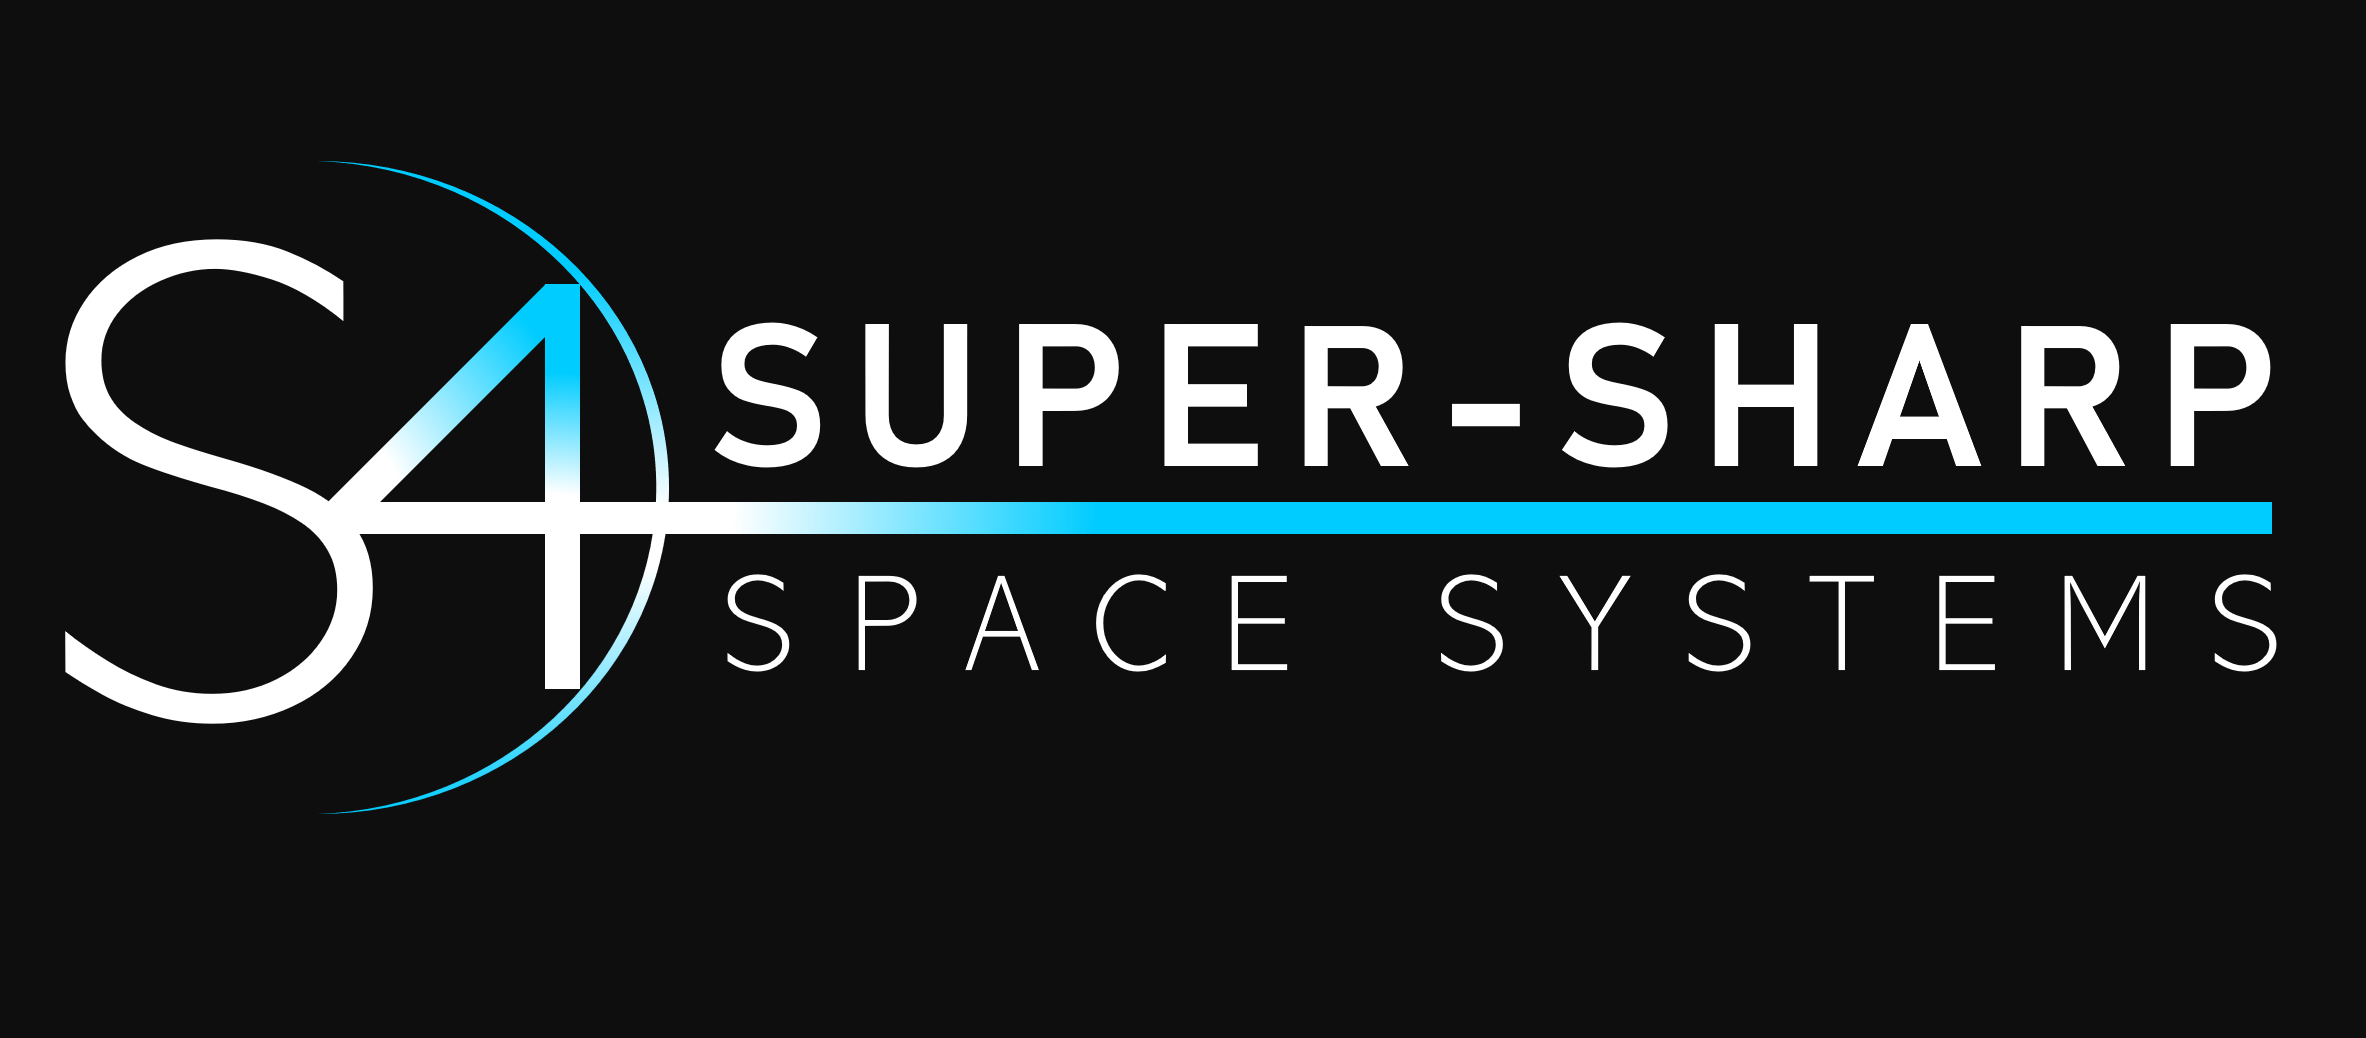 Super-Sharp Space Systems logo